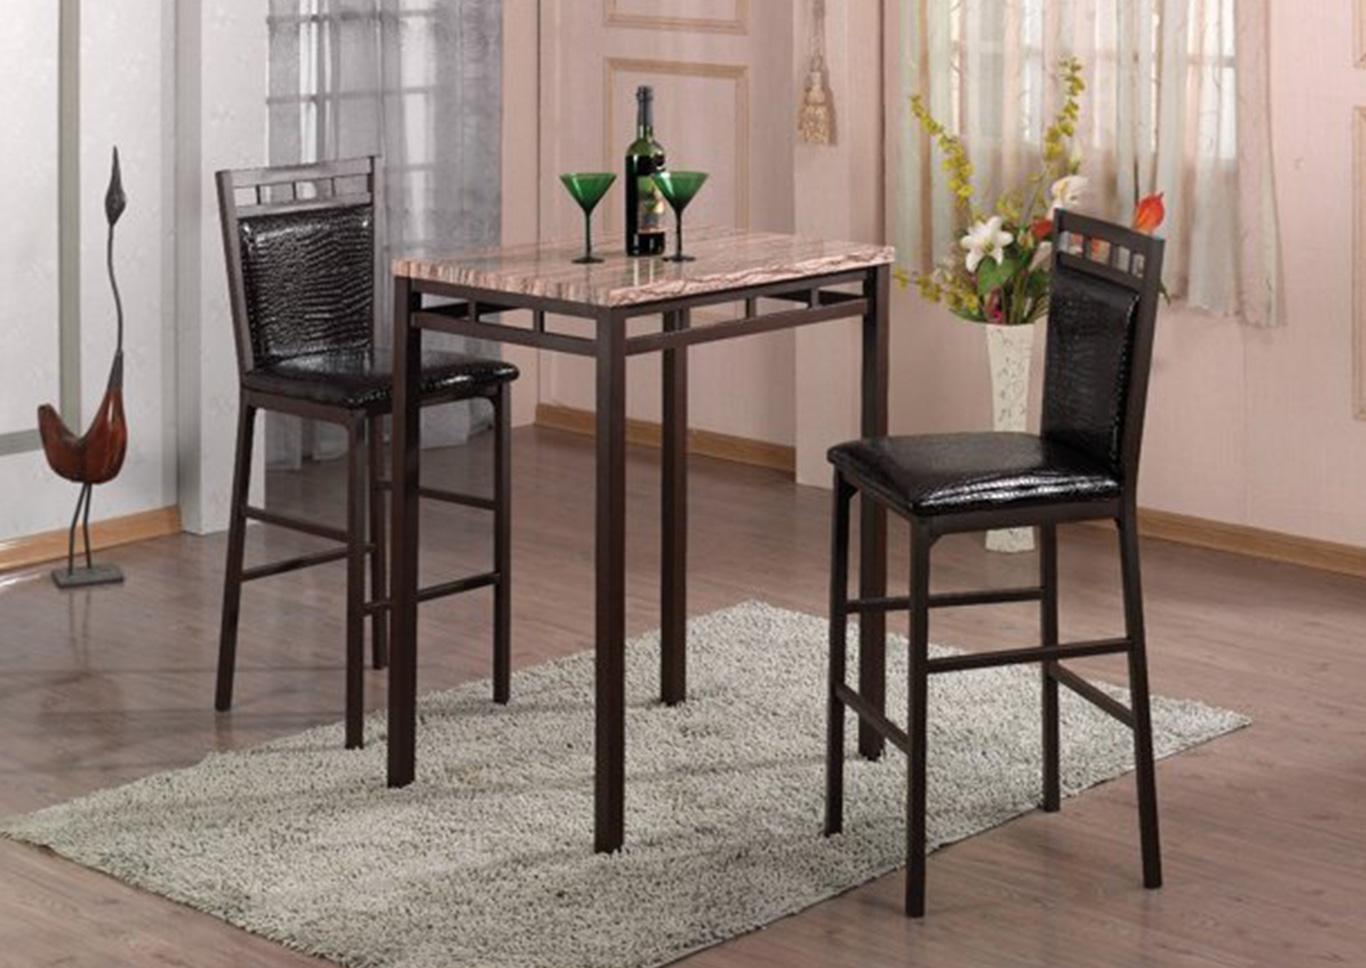 Homesource 3 Piece Counter Height Bistro Set,On Display Products